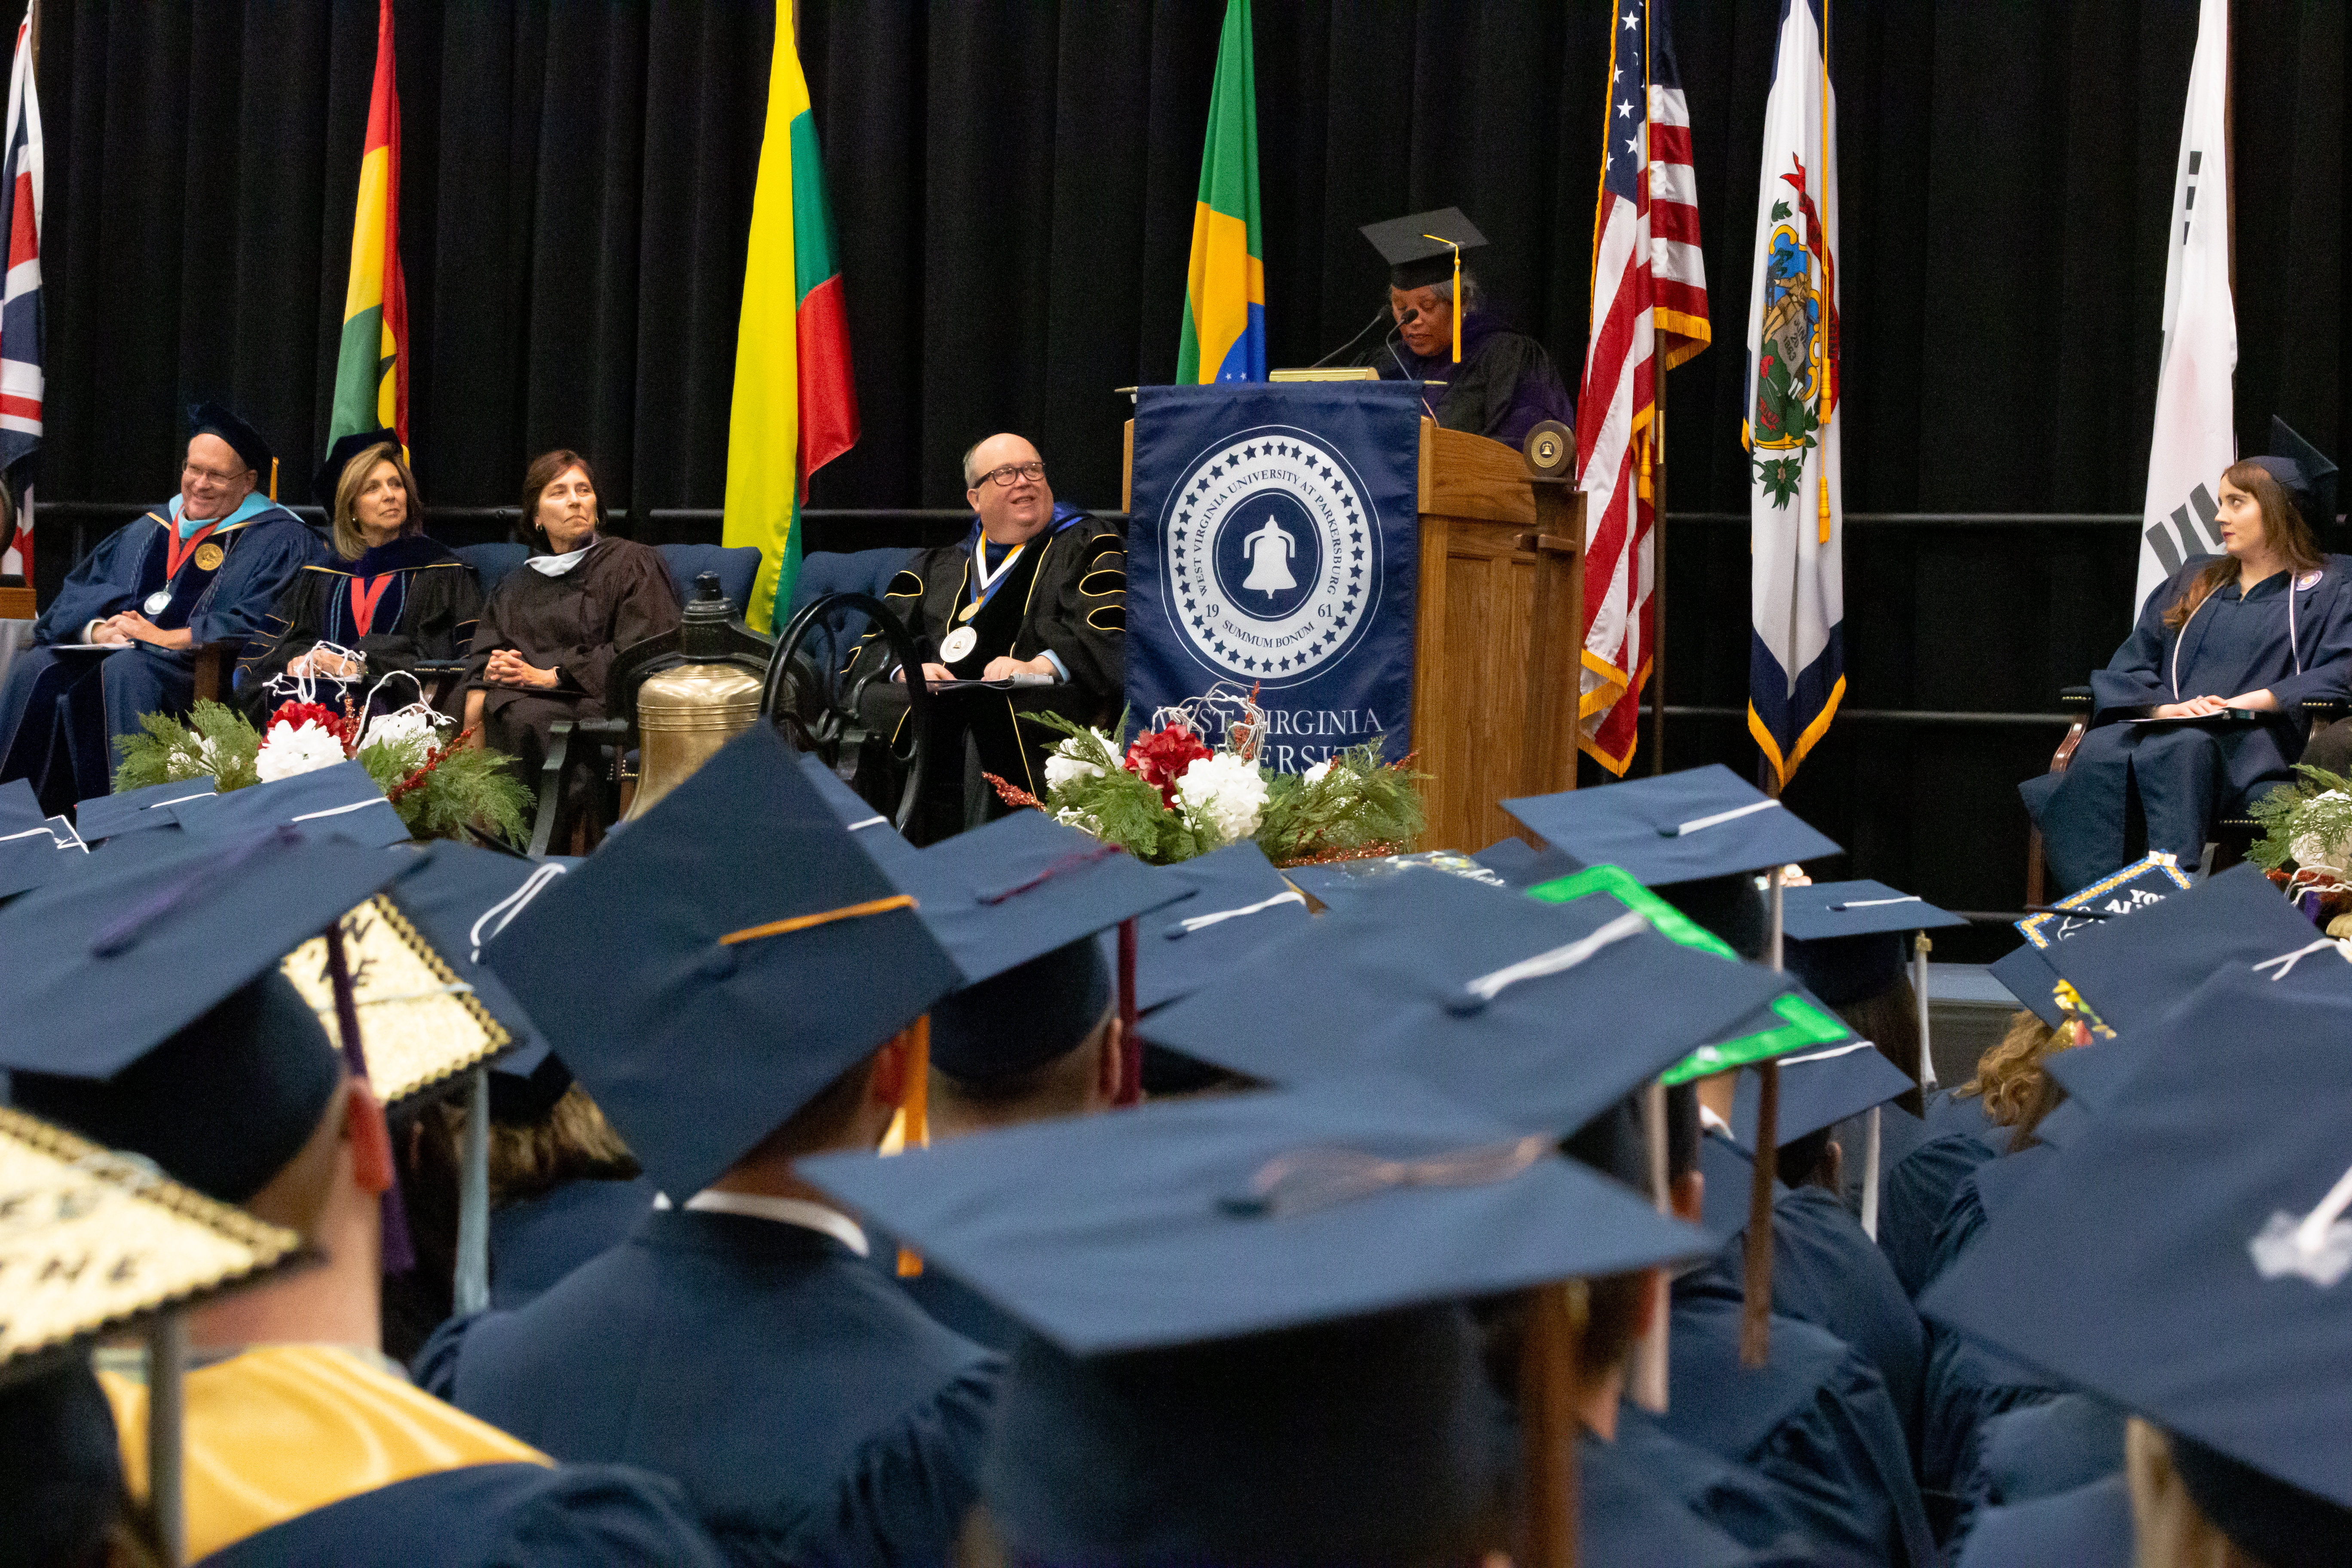 WVU Parkersburg holds fall 2019 commencement ceremony